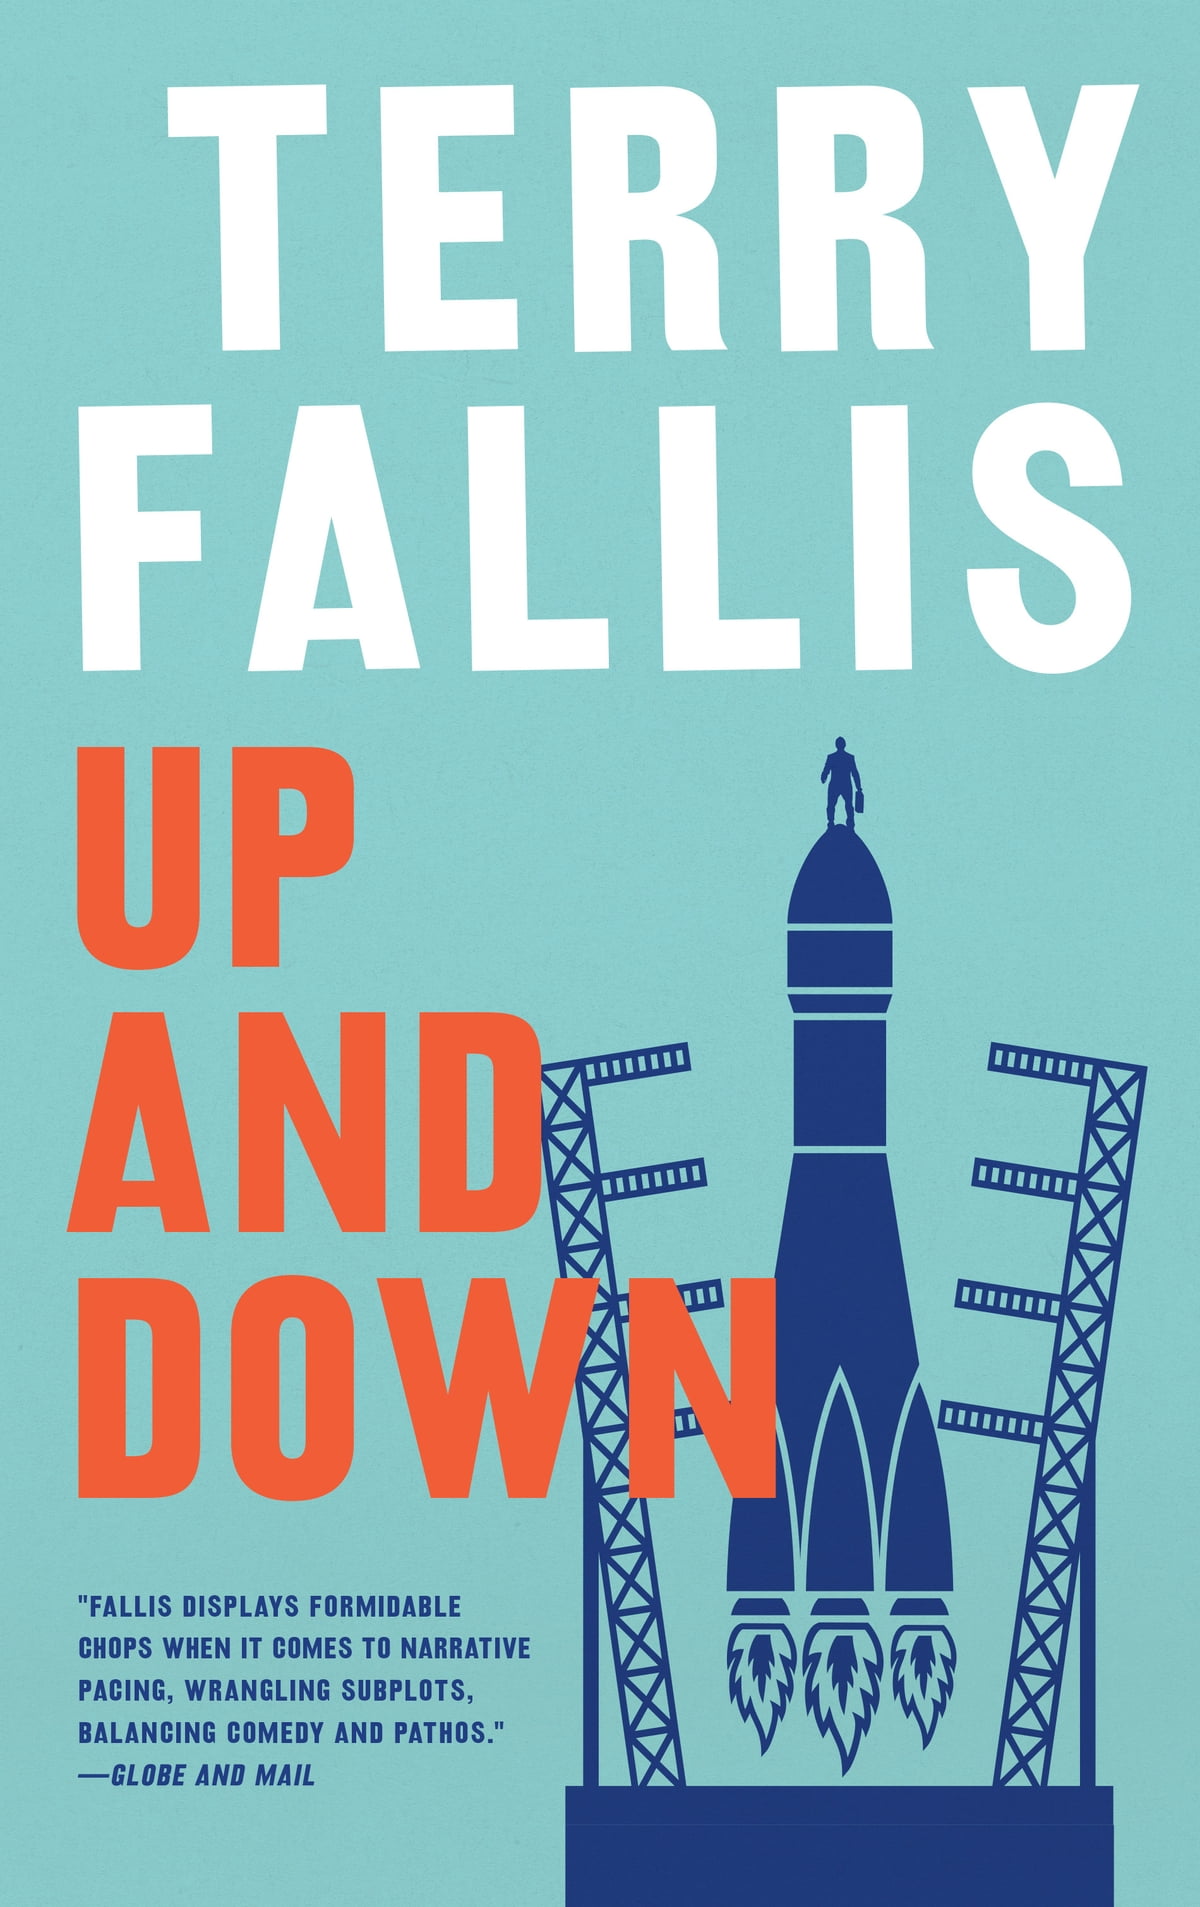 Terry Fallis: Up and down (2012, McClelland &Stewart)